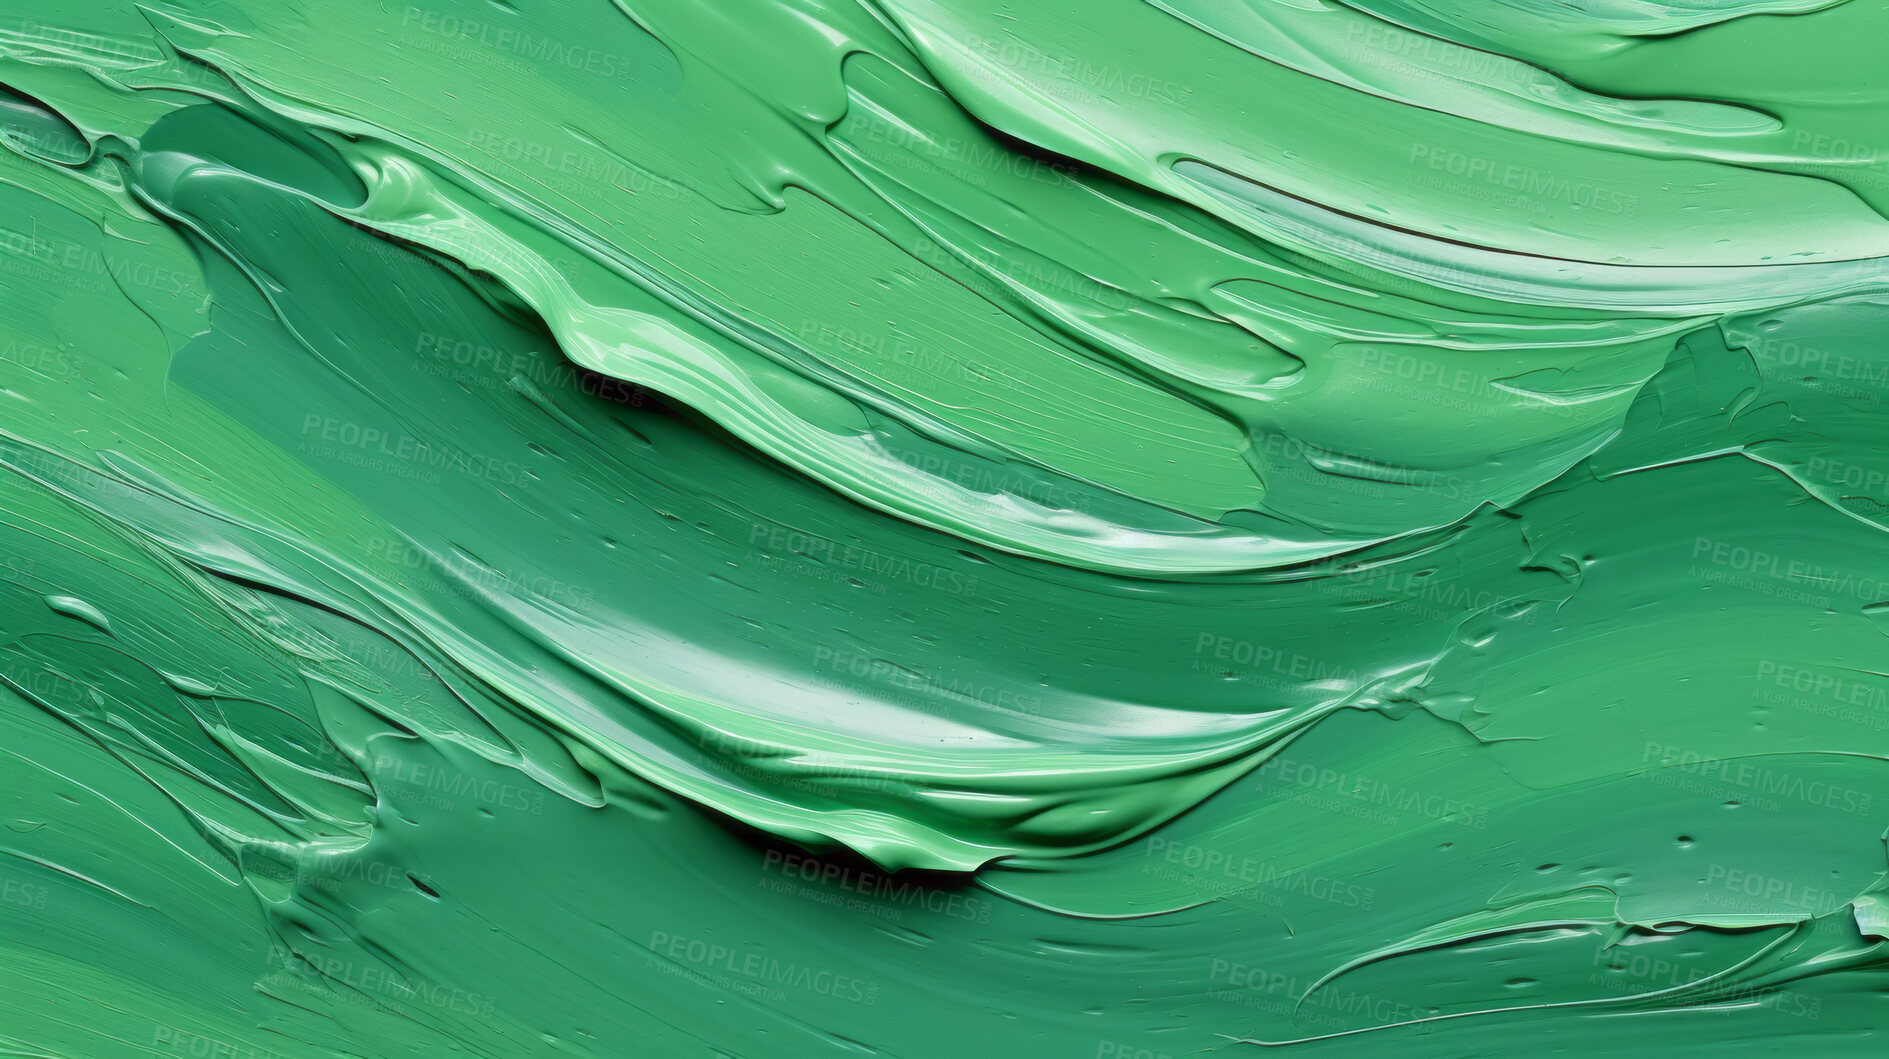 Buy stock photo Green smooth paint texture close-up. Swirl abstract background.